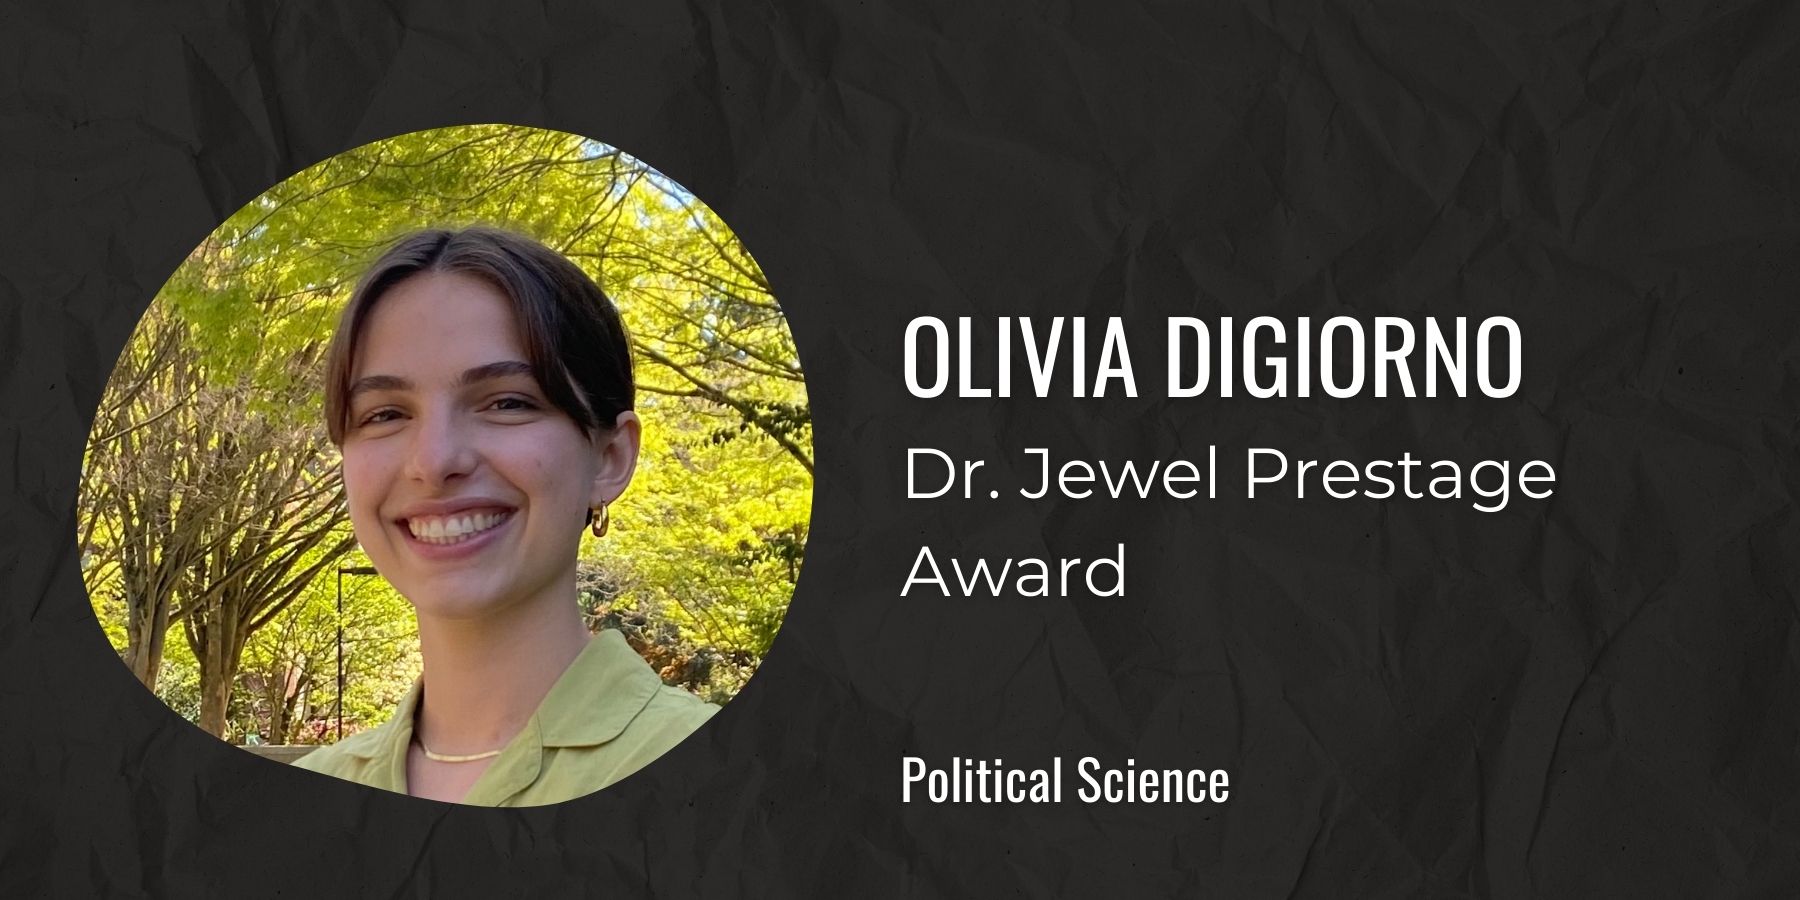 Image of Olivia DiGiorno with text: Dr. Jewel Prestage Award, Political Science
